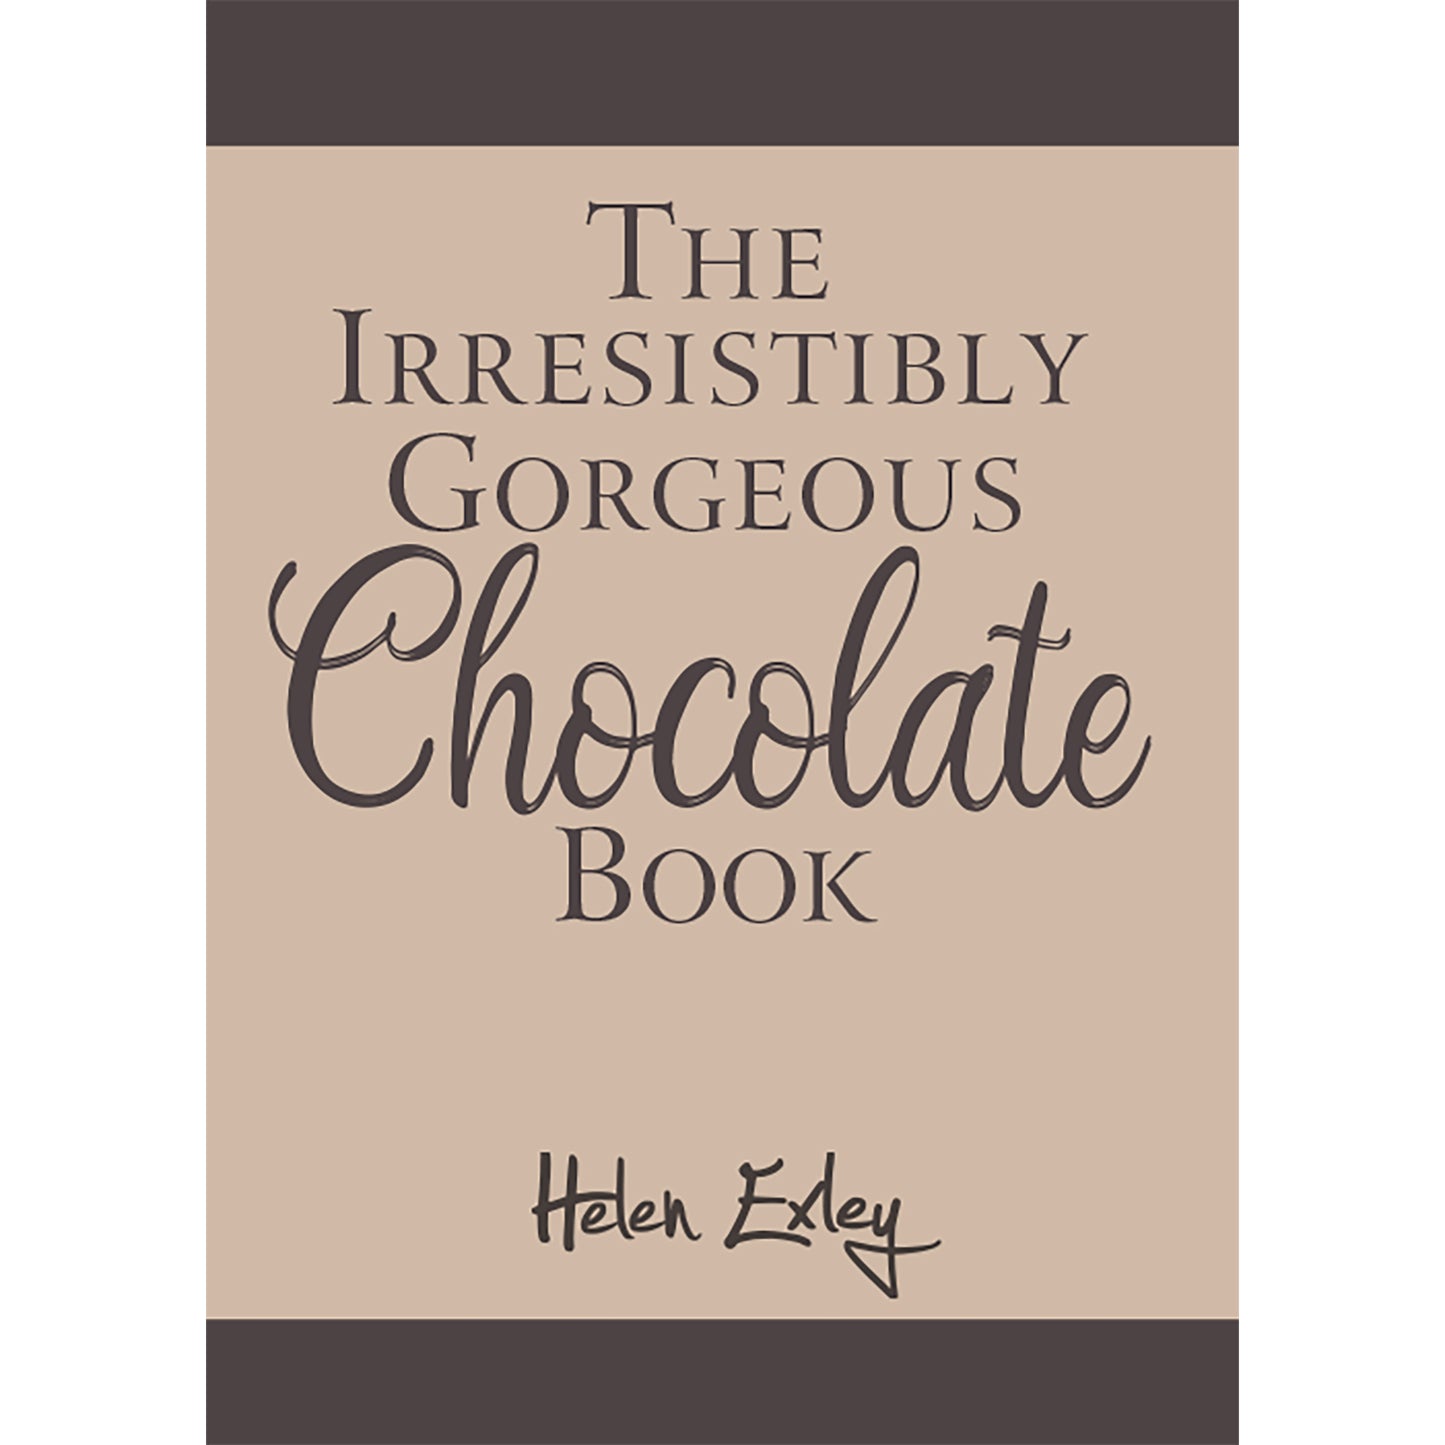 The Irresistibly Gorgeous Chocolate Book